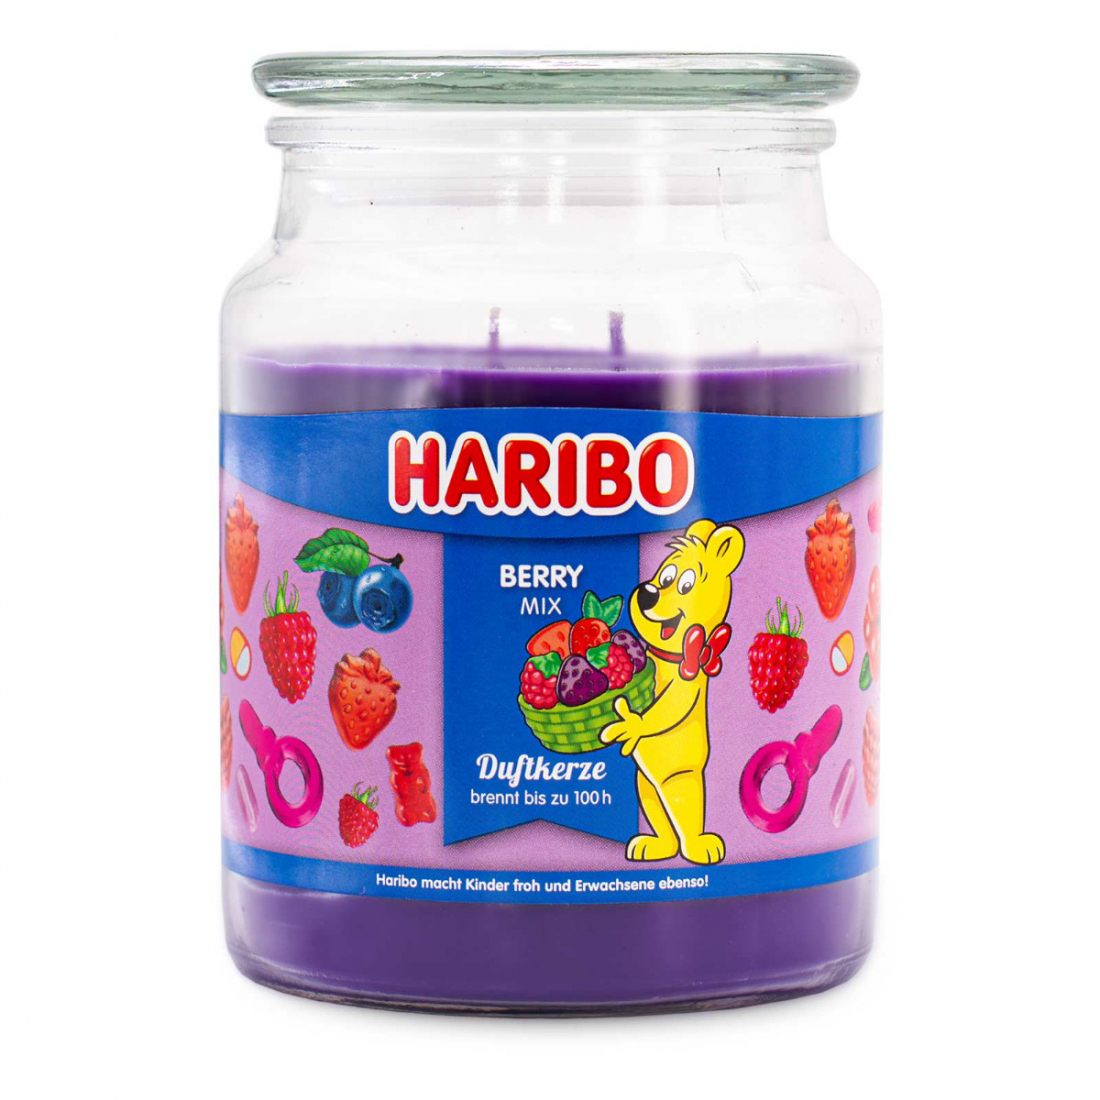 Bougie 2 mèches 'Haribo Berry Mix' - 510 g